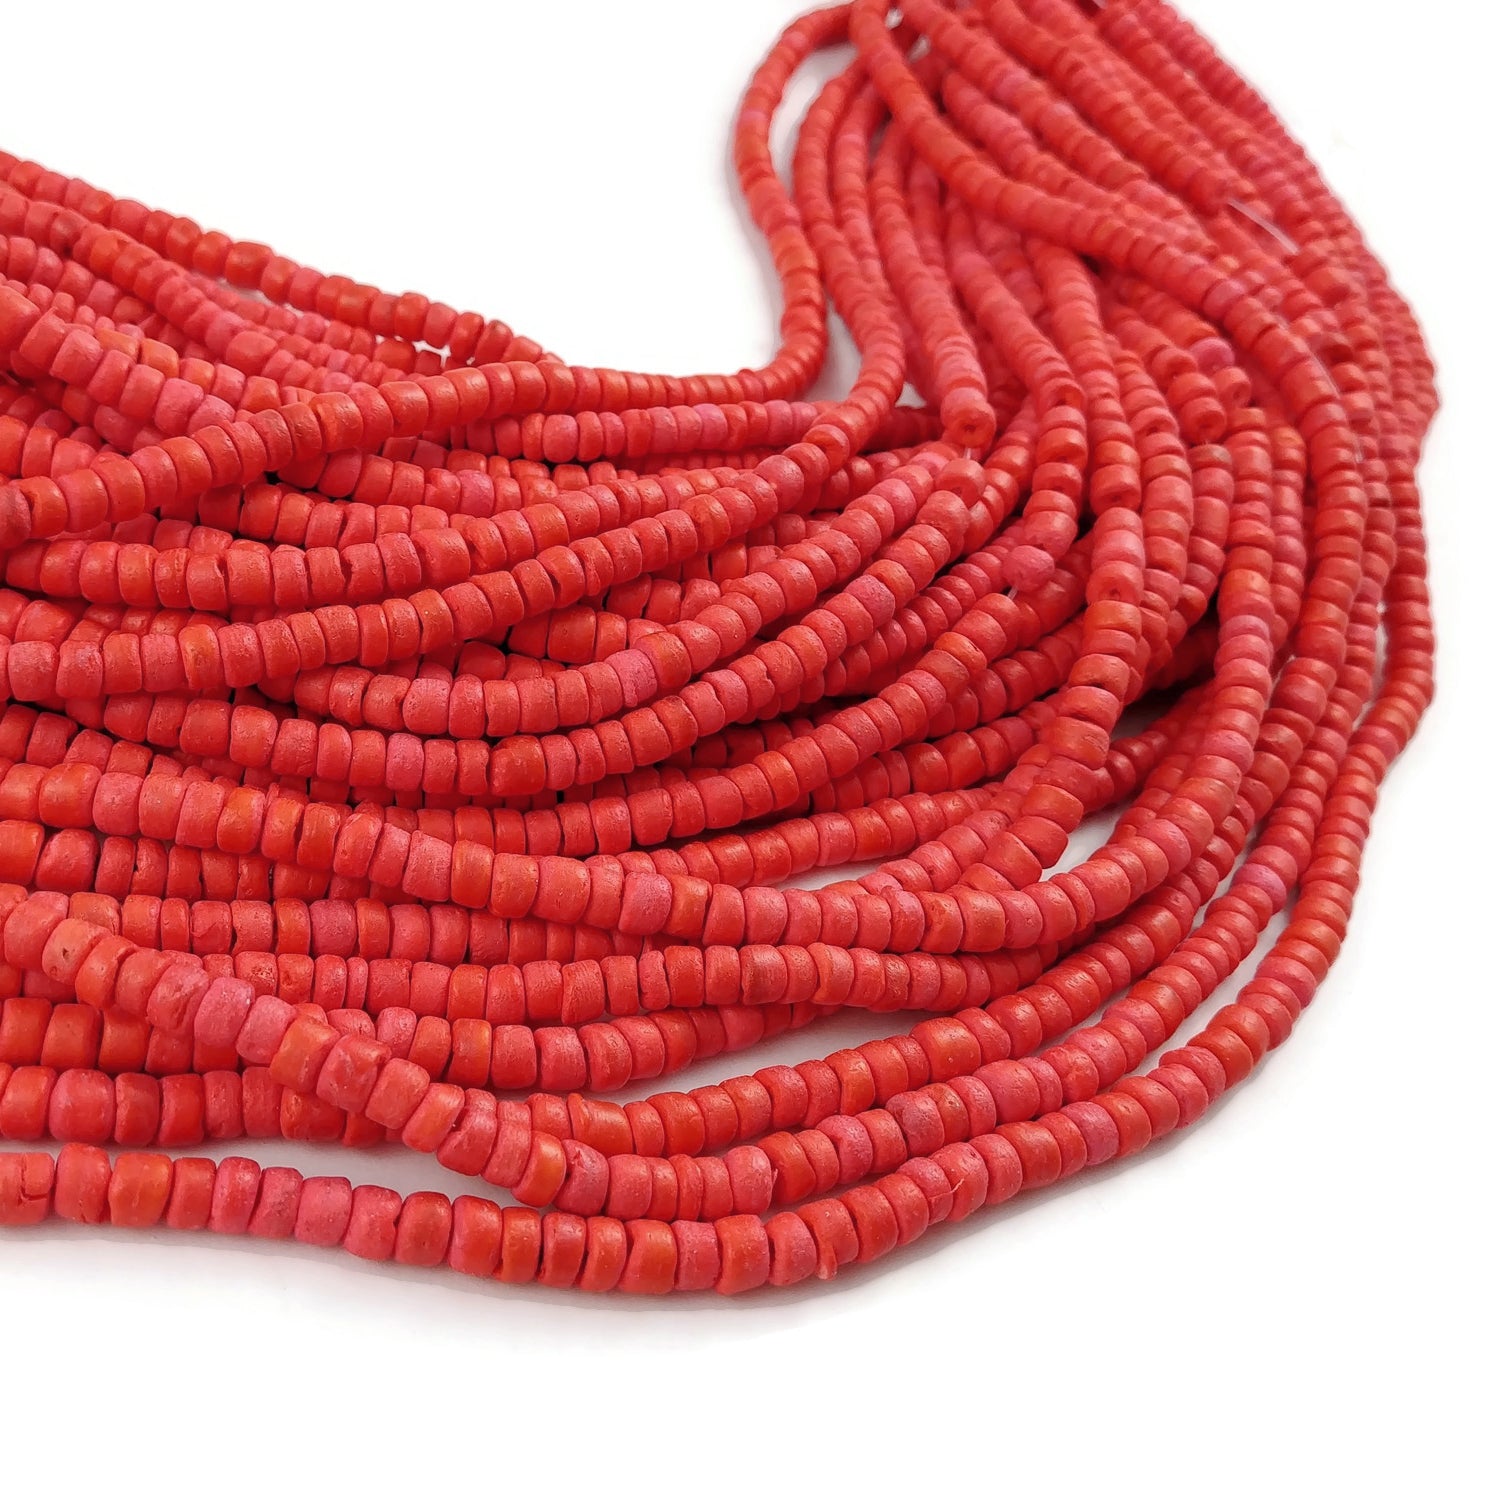 120 Coral red coconut beads - Wood rondelle disk beads 5mm